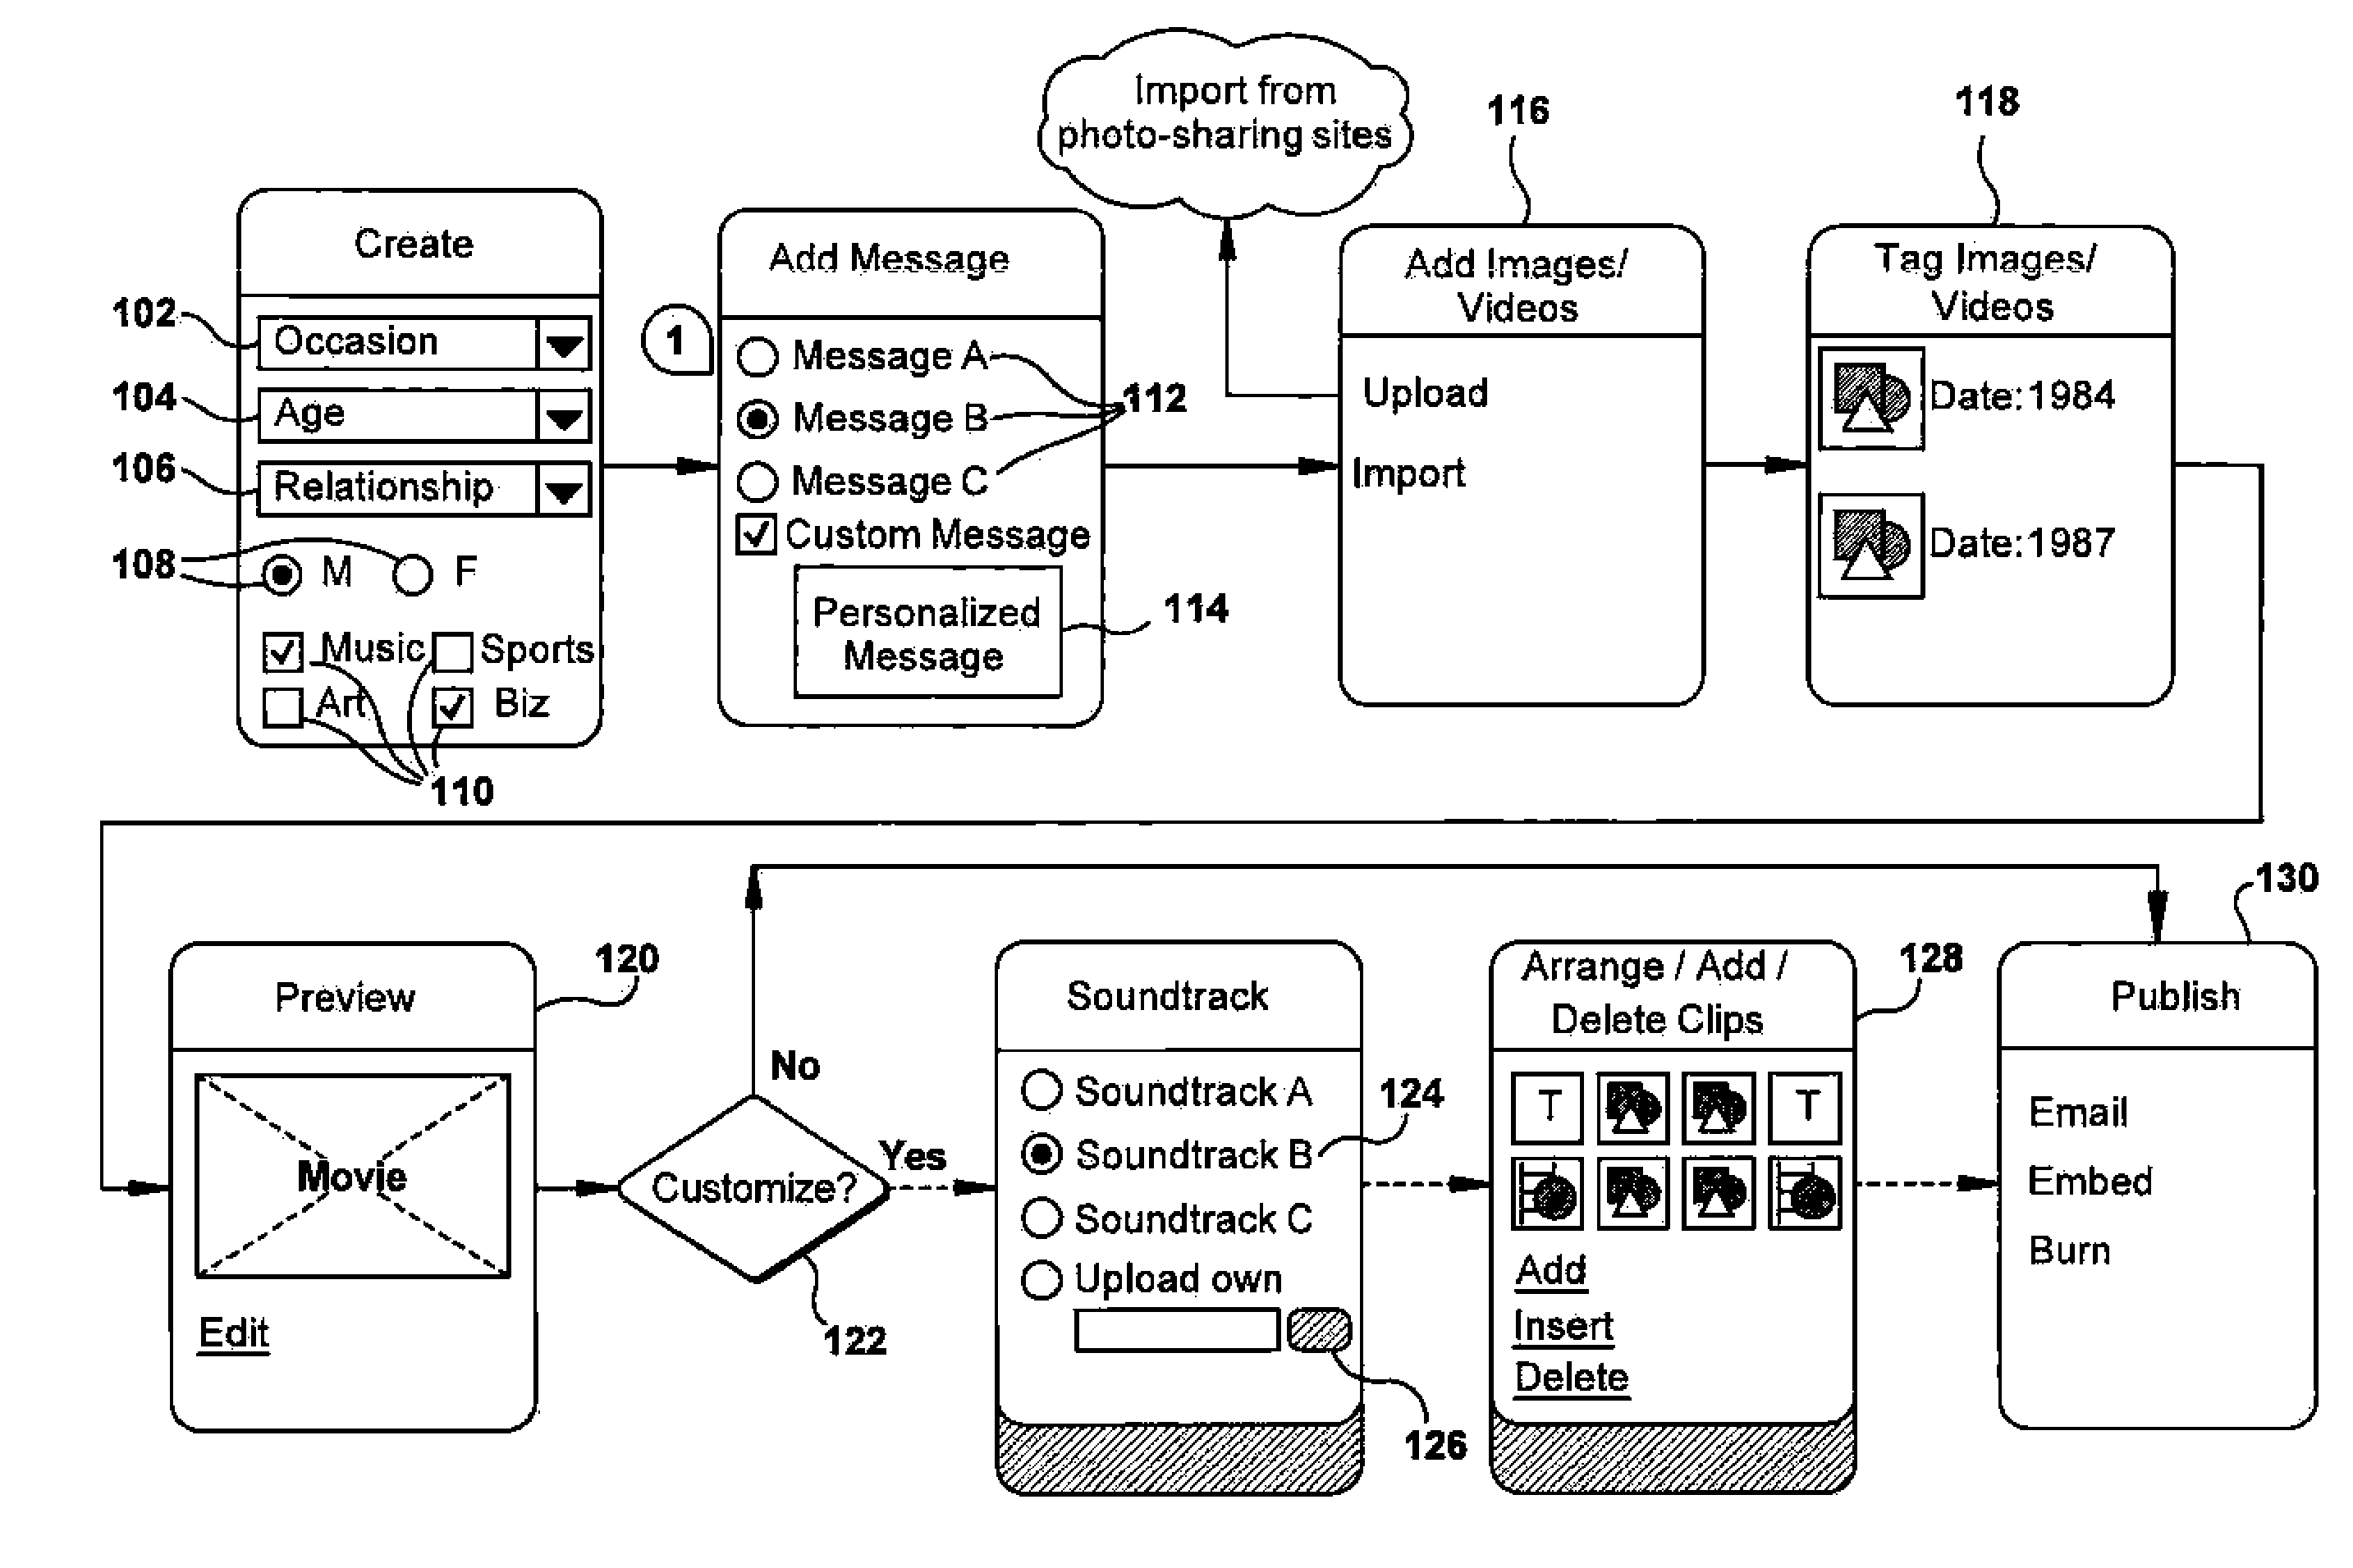 System and method for automated compilation and editing of personalized videos including archived historical content and personal content